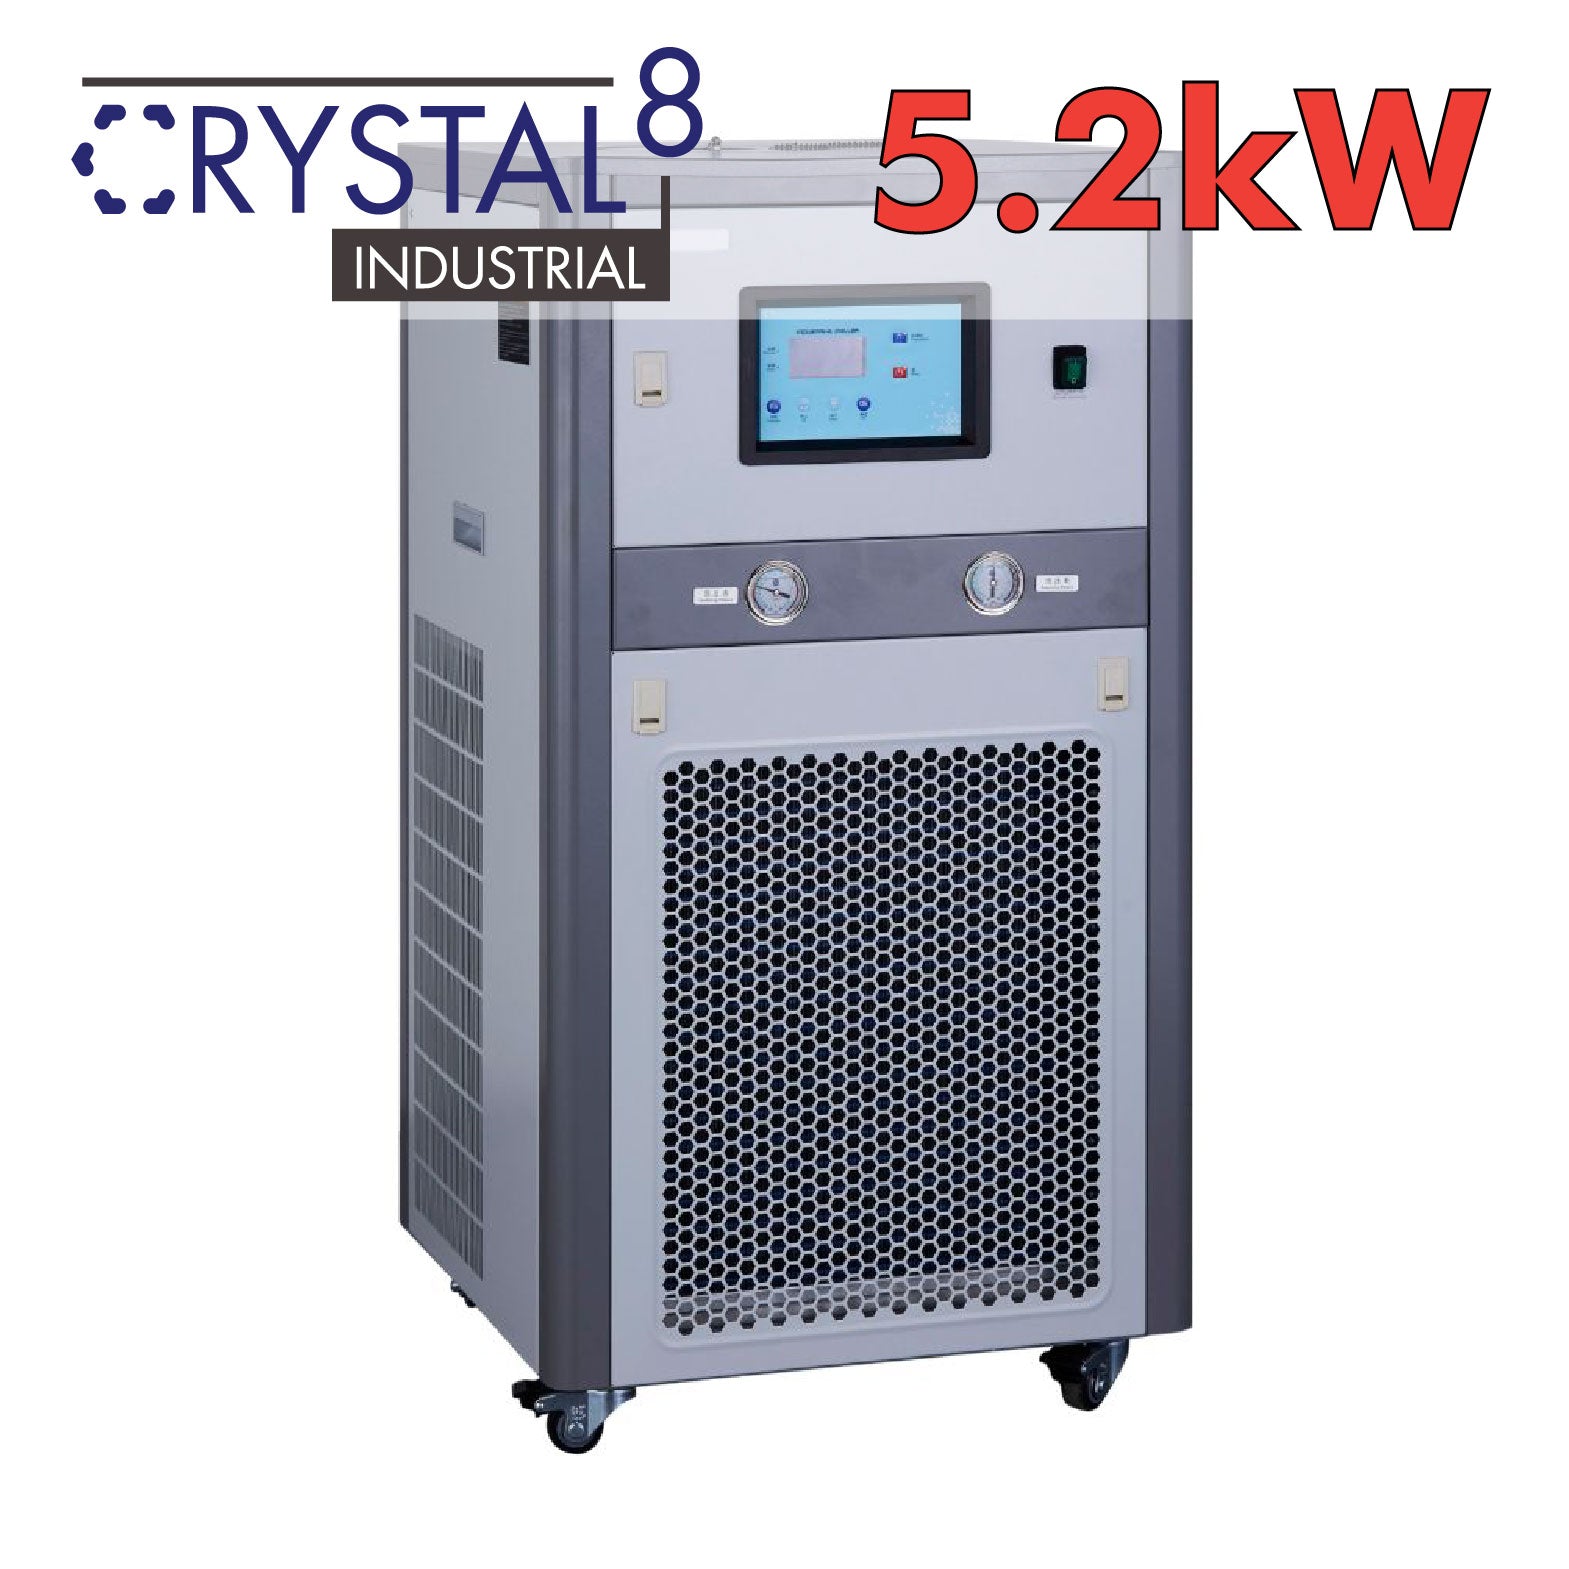 Crystal8 - 5.2kw Industrial Glycol Chiller - 220V single phase - crash chill 2-3 600L Fermenters